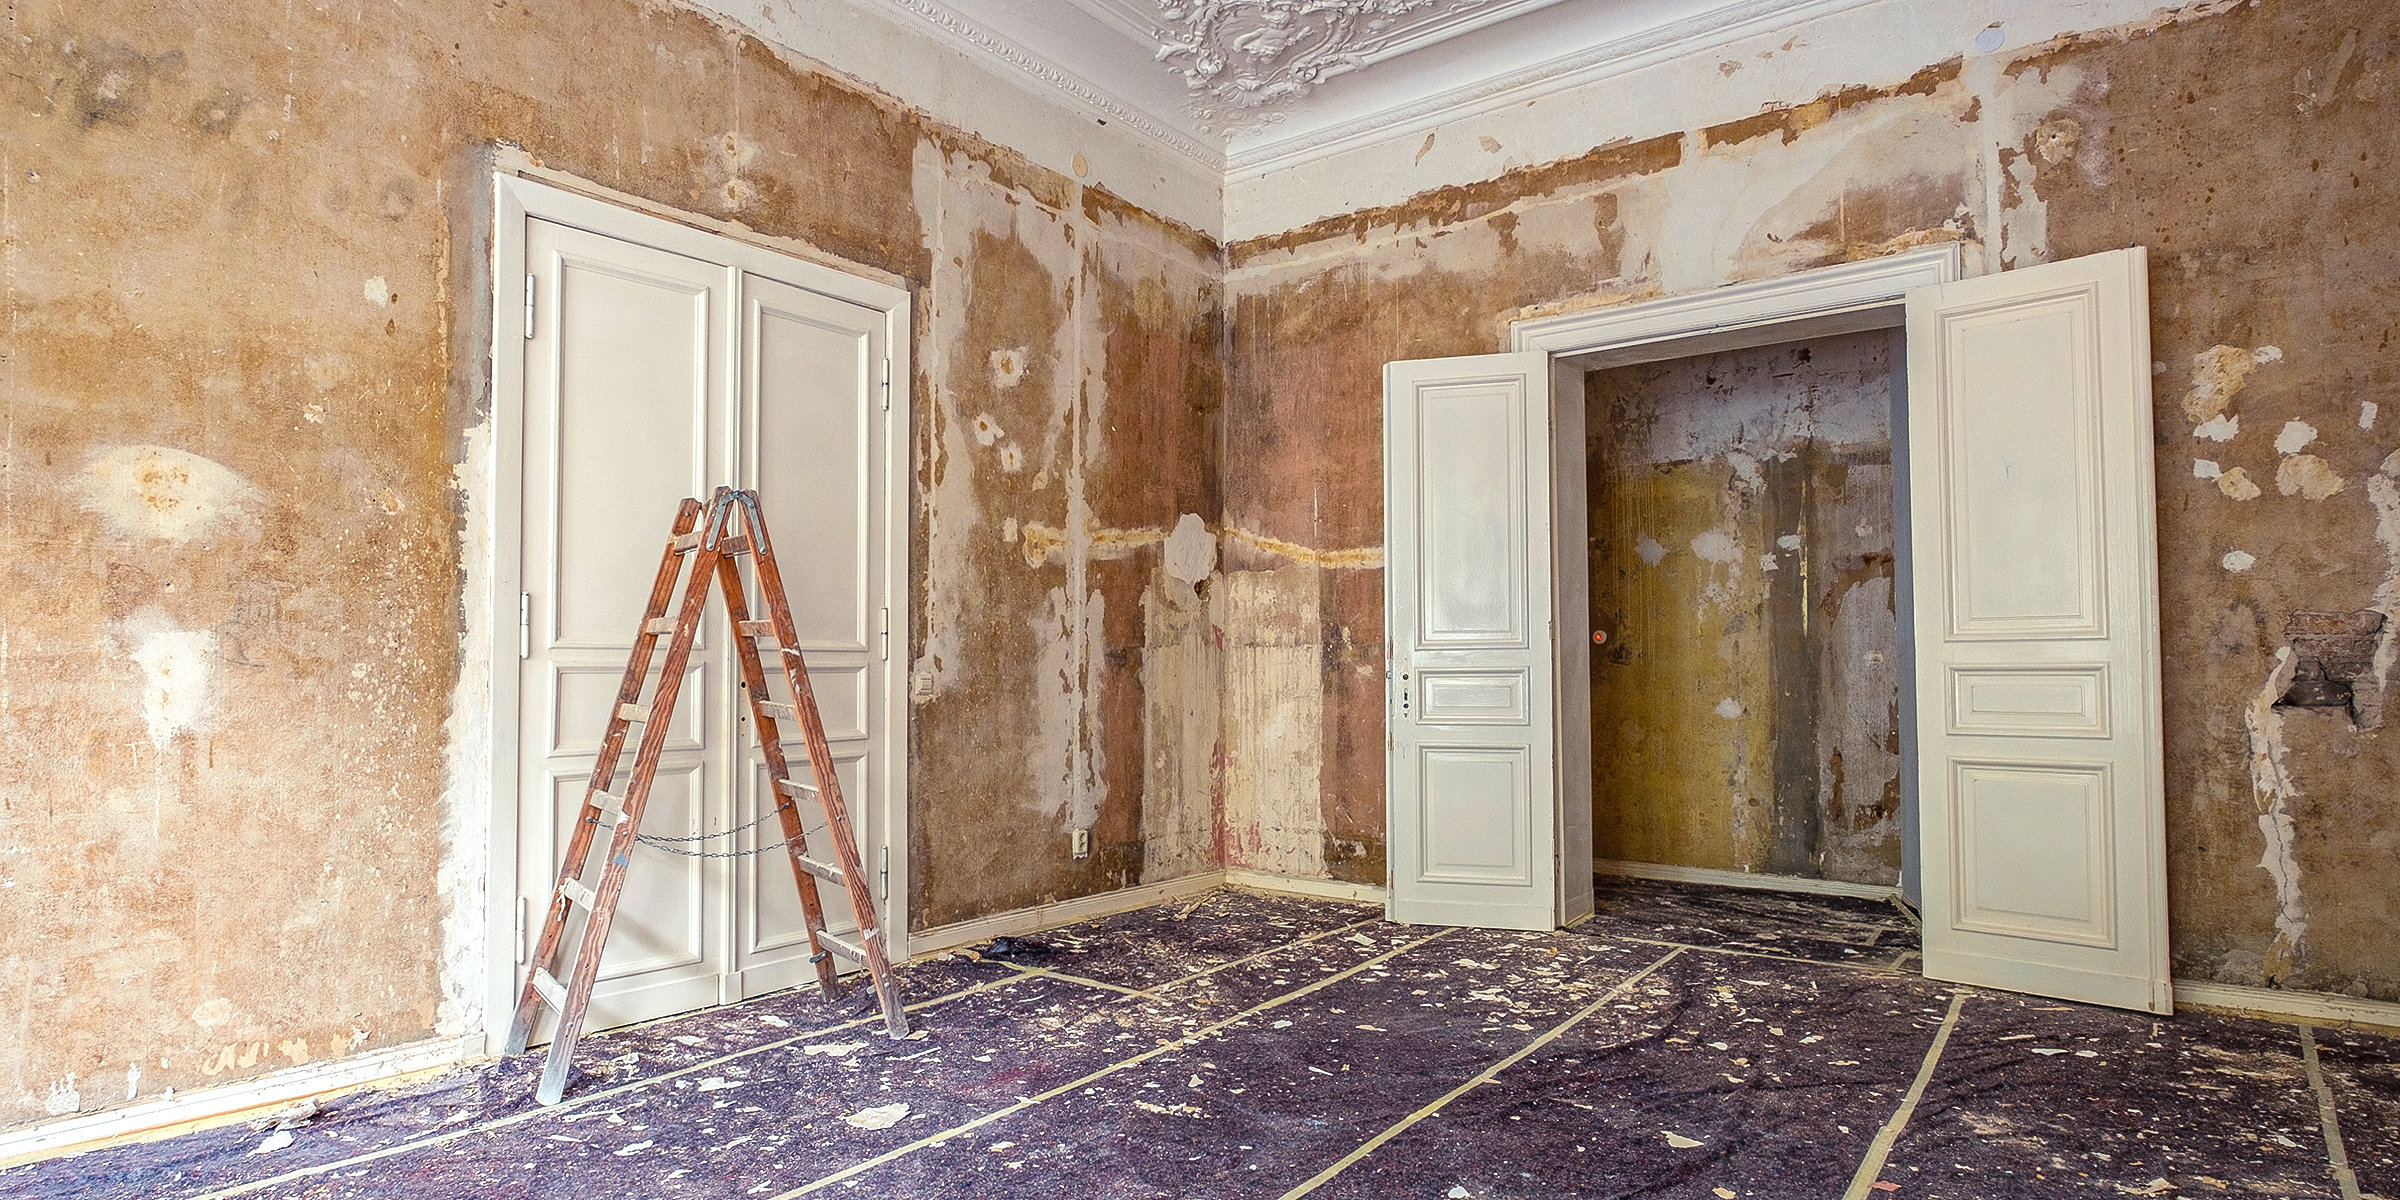 The interior of house under renovation | Source: Shutterstock